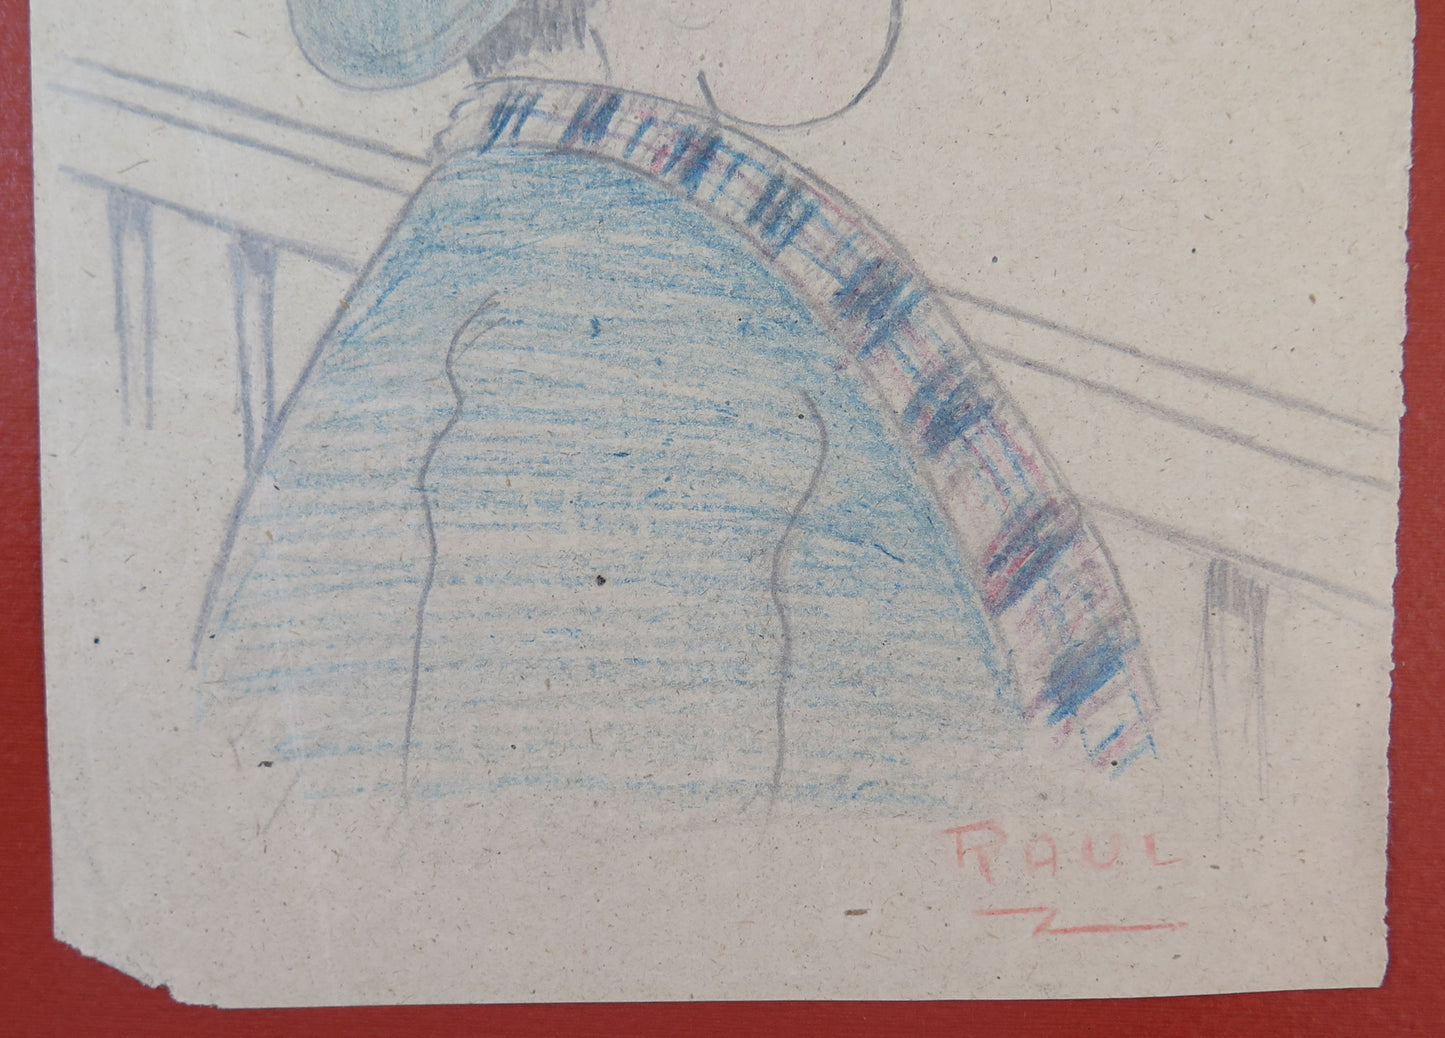 OLD COMIC DRAWING PENCIL ON PAPER SIGNED RAUL PORTRAIT OF MAN BM53.5b